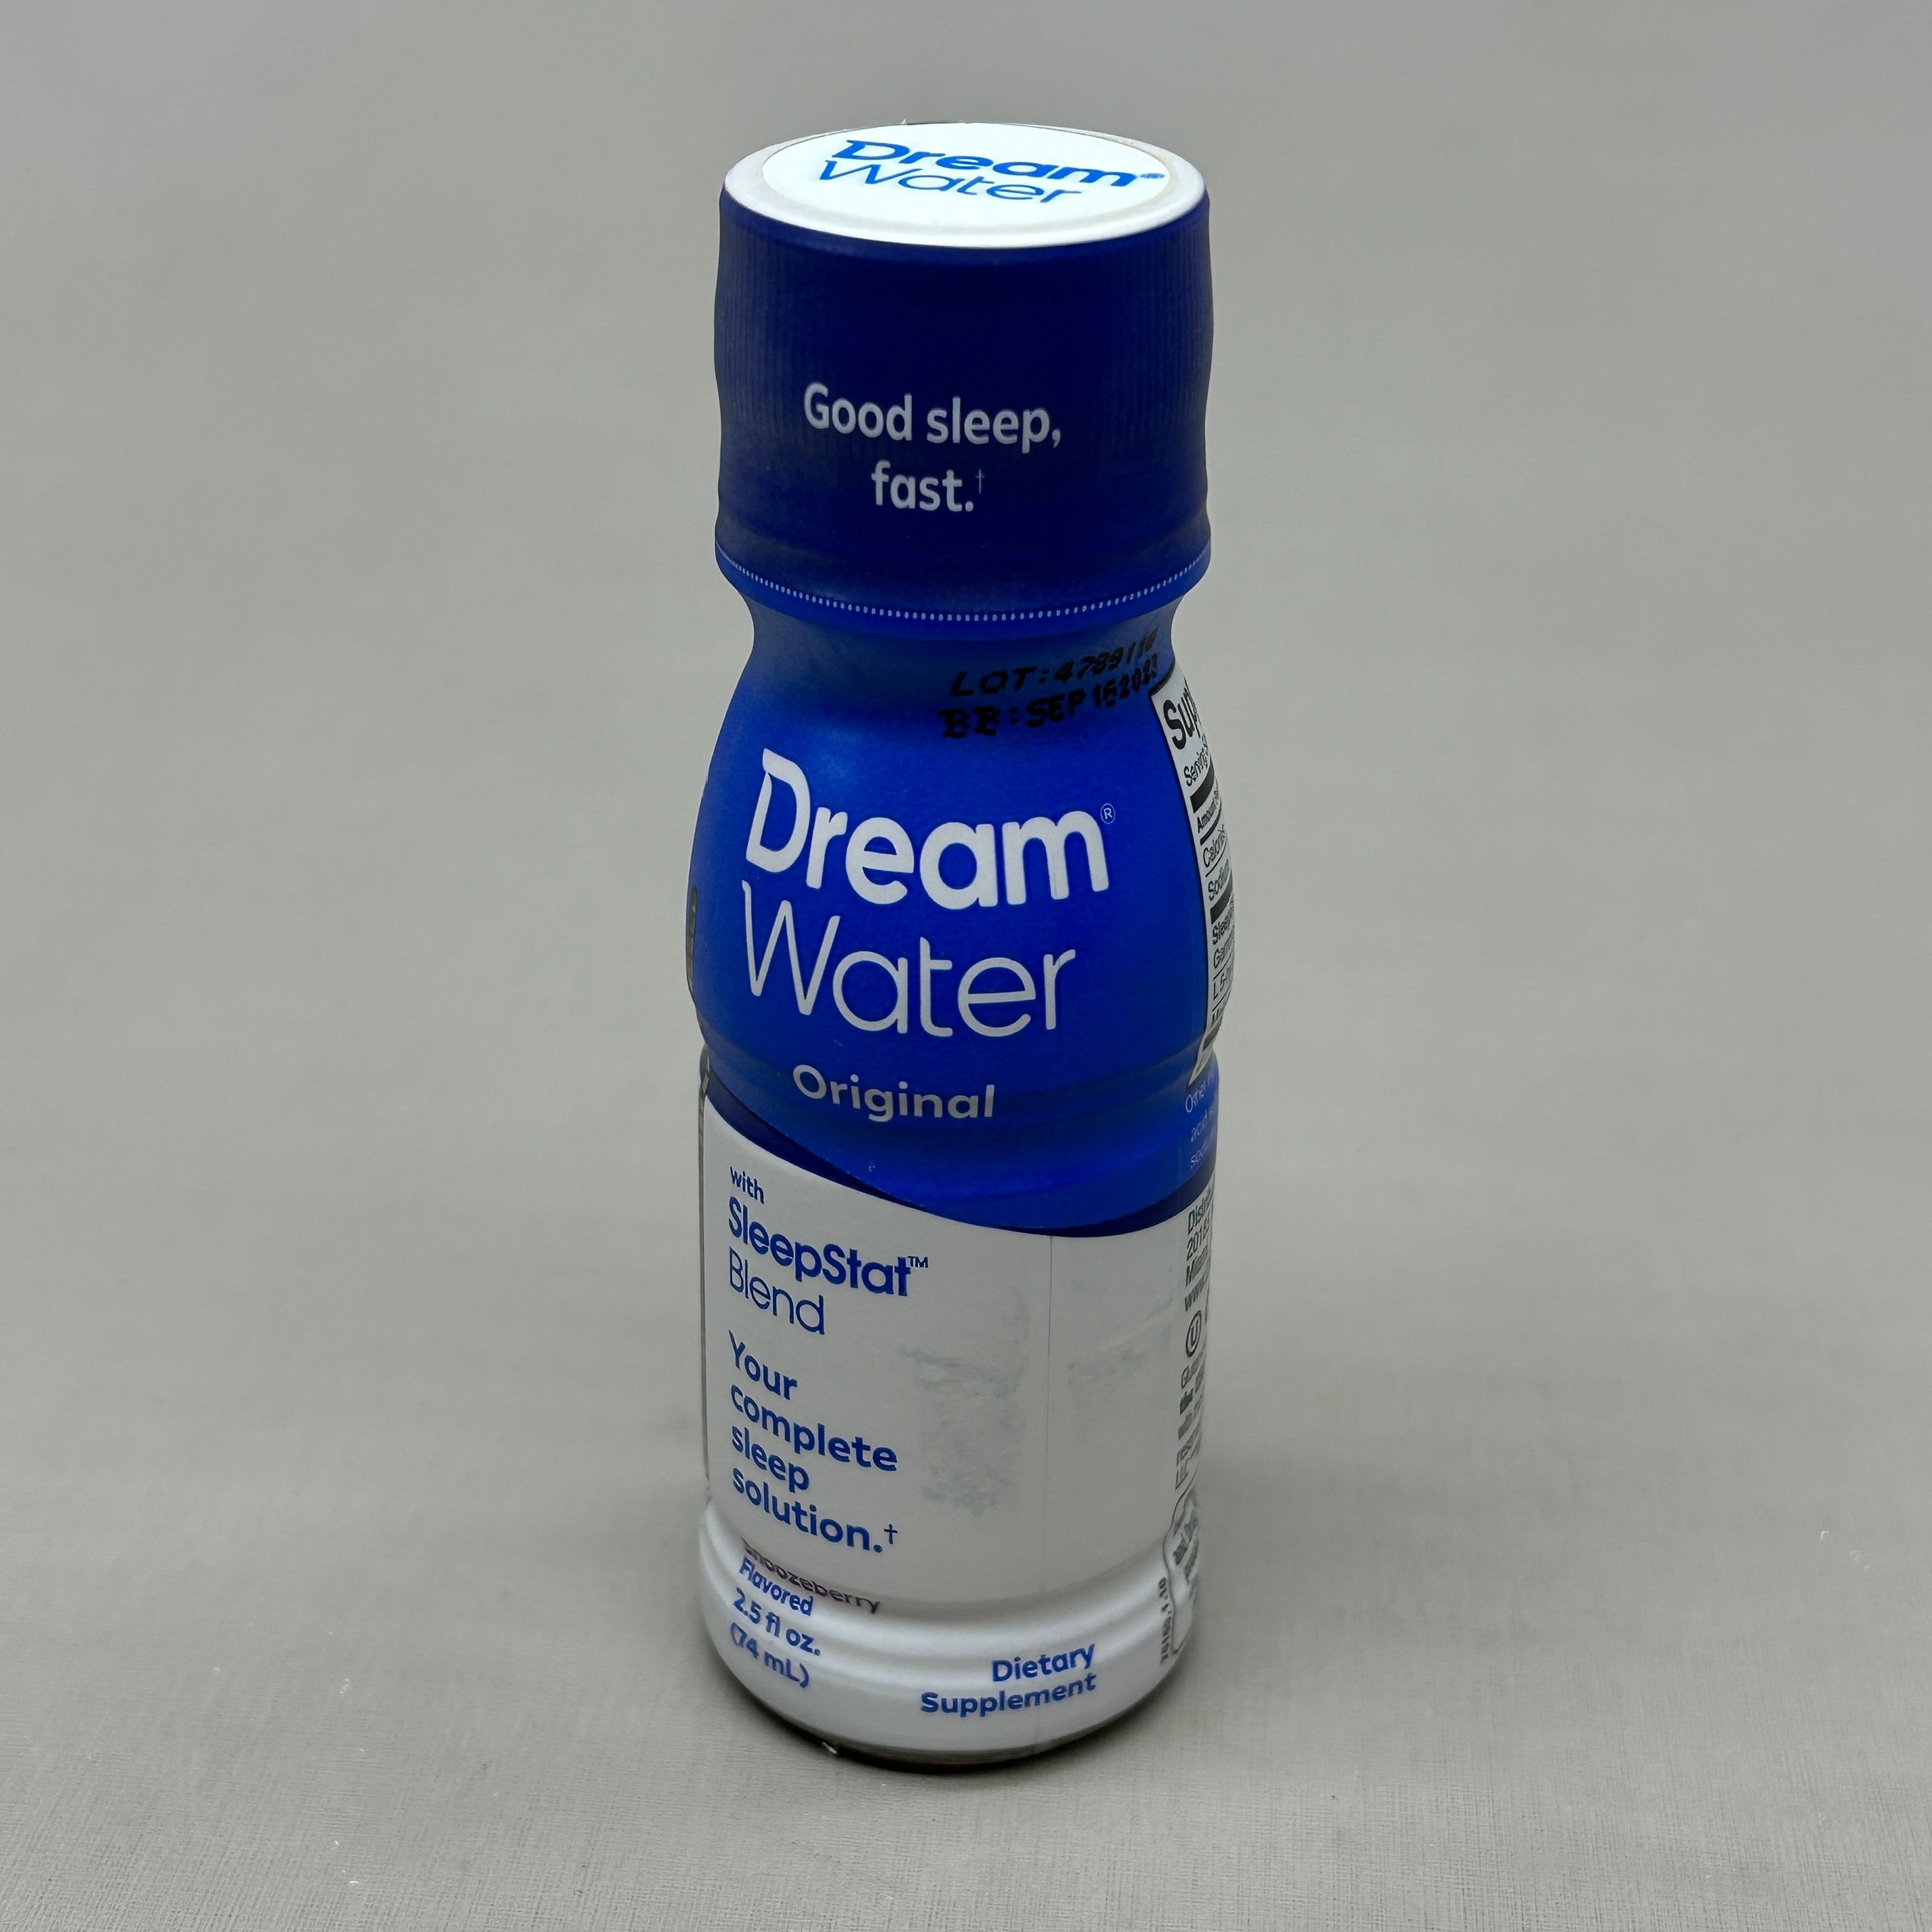 z@ DREAM WATER 12-PACK! Sleep and Relaxation Shot Snoozeberry 2.5 fl oz BB 09/23 (New) E